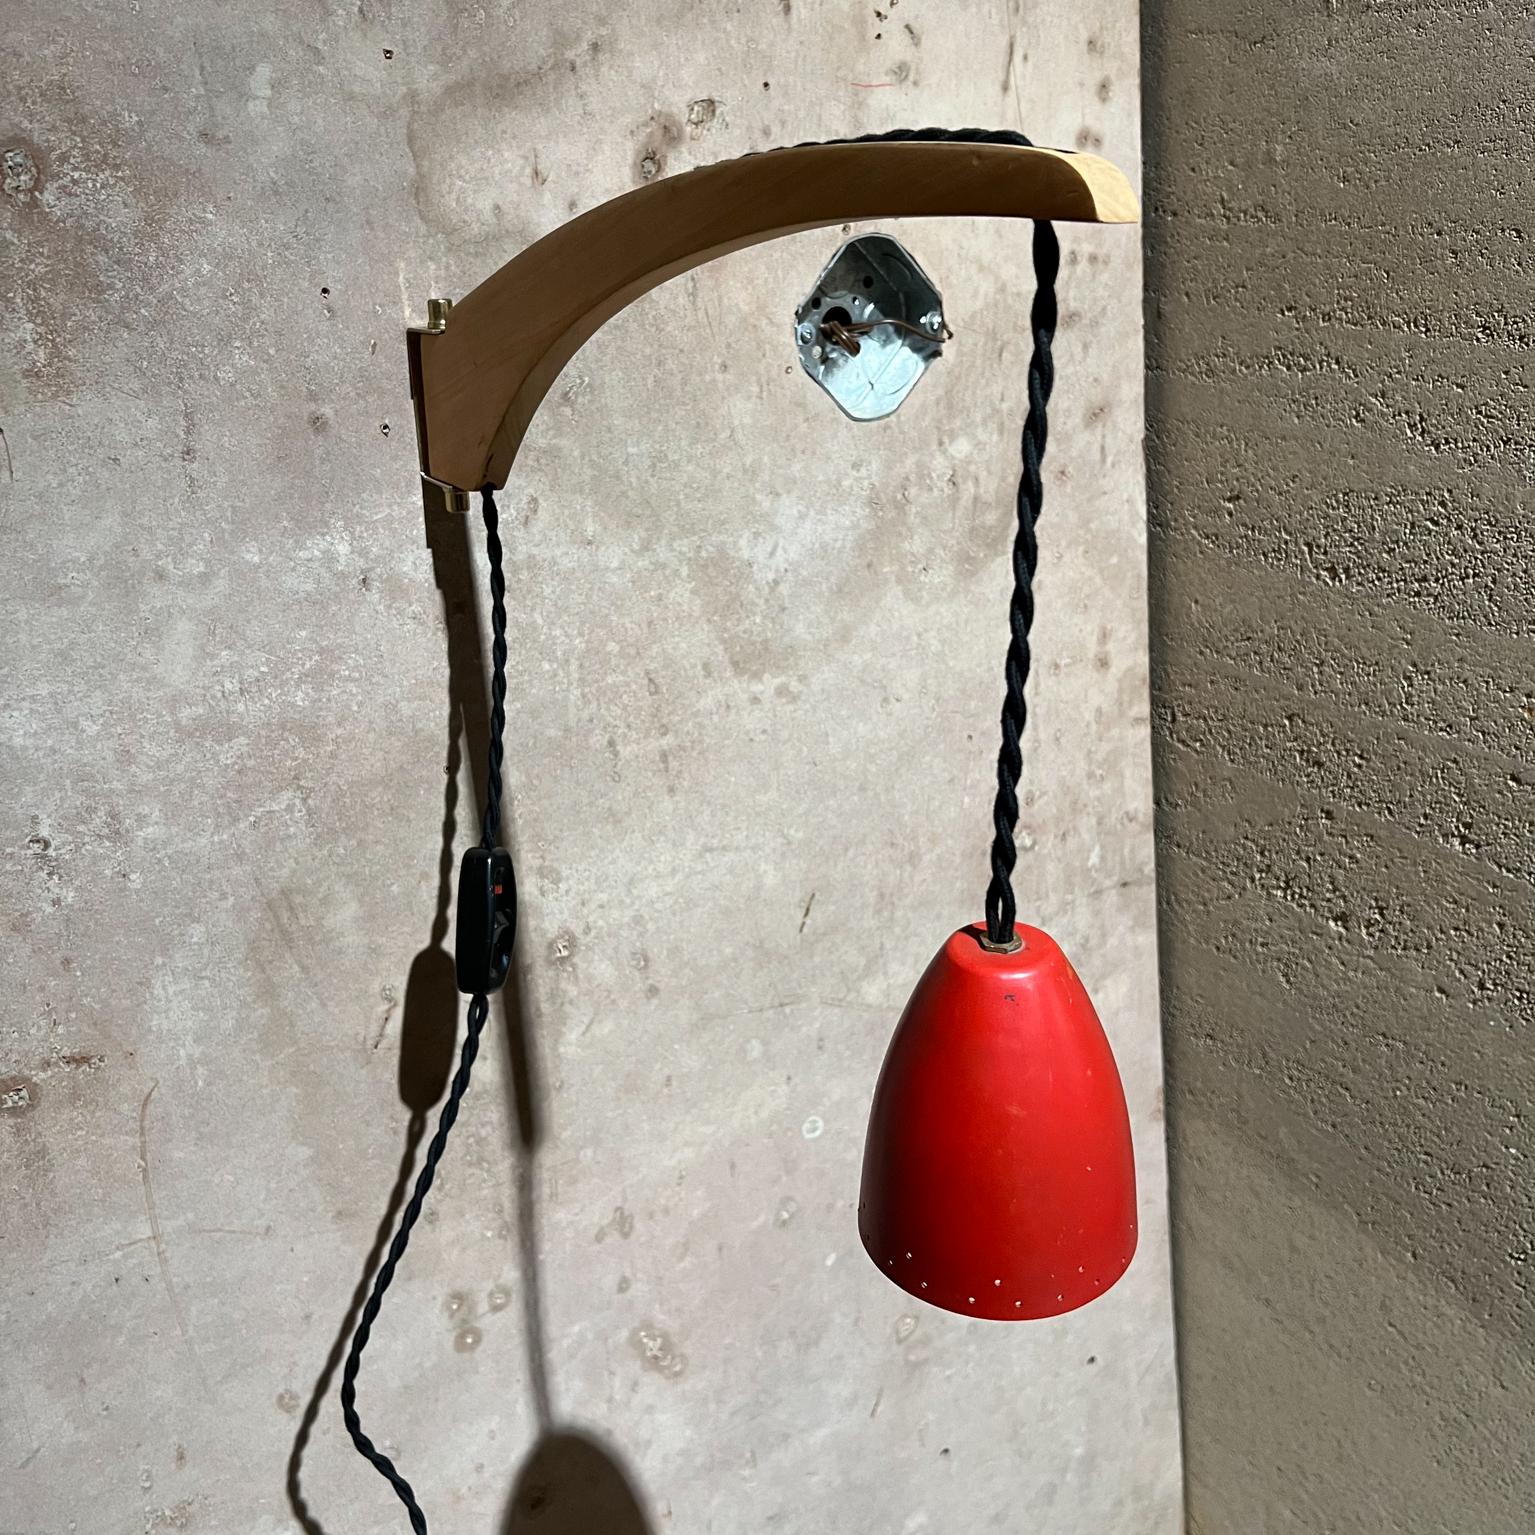 1950s Vintage wall lamp Perforated red shade sconce Style of Stilnovo Italy
Swivel arm mount and adjustable shade height with cord.
13 tall x 3.75 w x 18.25 d Shade 4.5 tall
Original unrestored vintage condition
Refer to images provided.